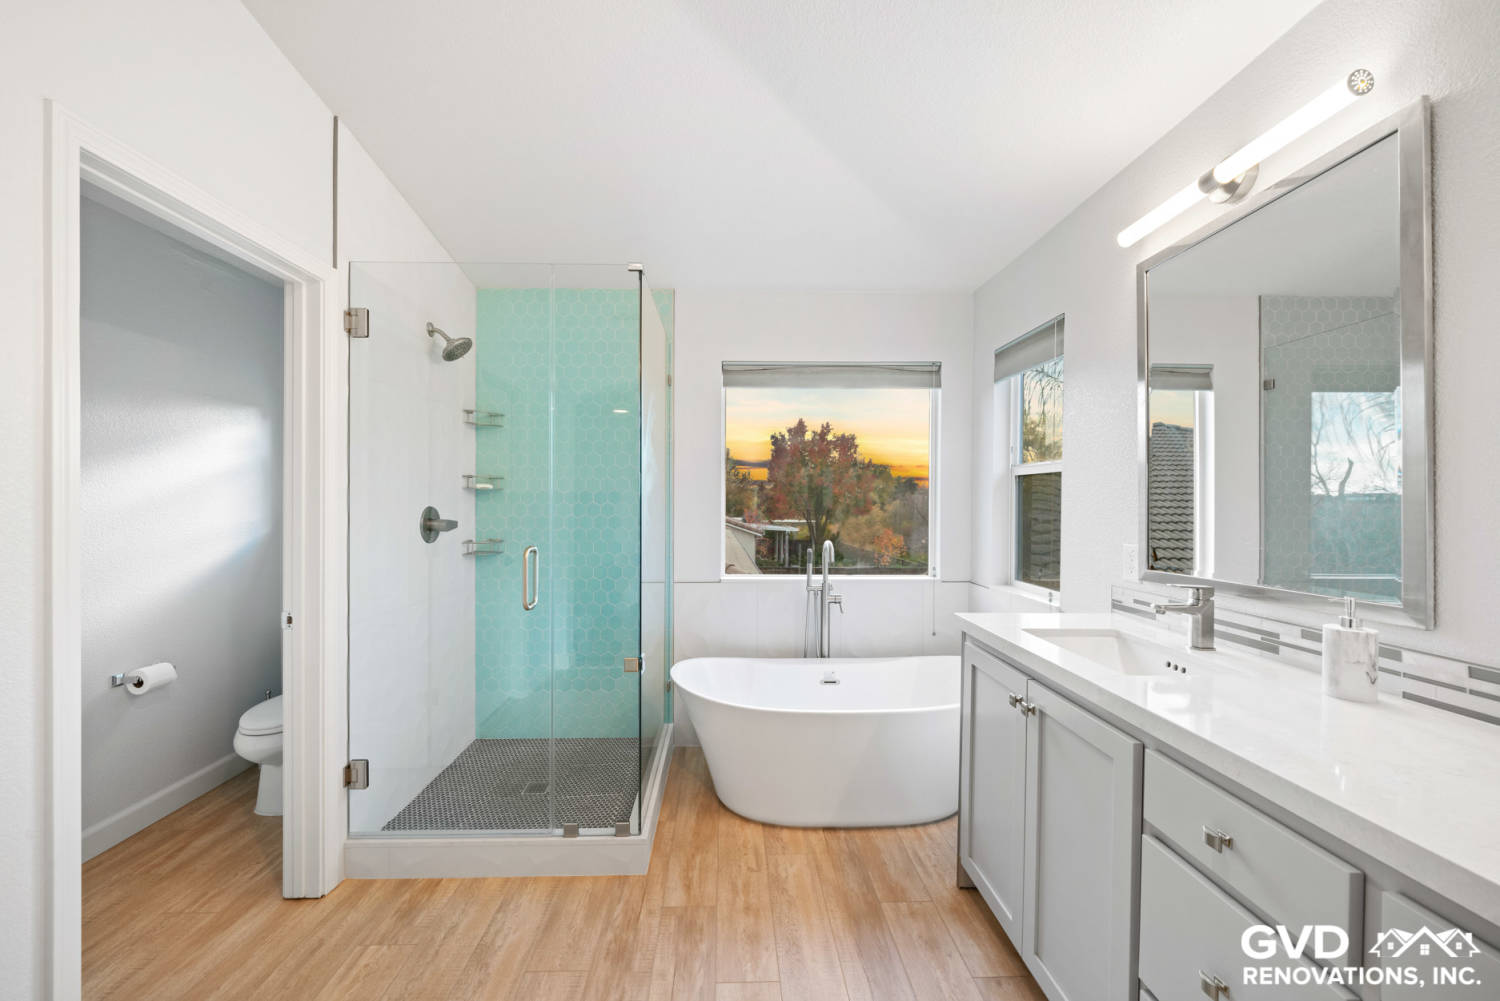 Average Cost Of A Bathroom Remodel, How To Redo A Bathtub Shower